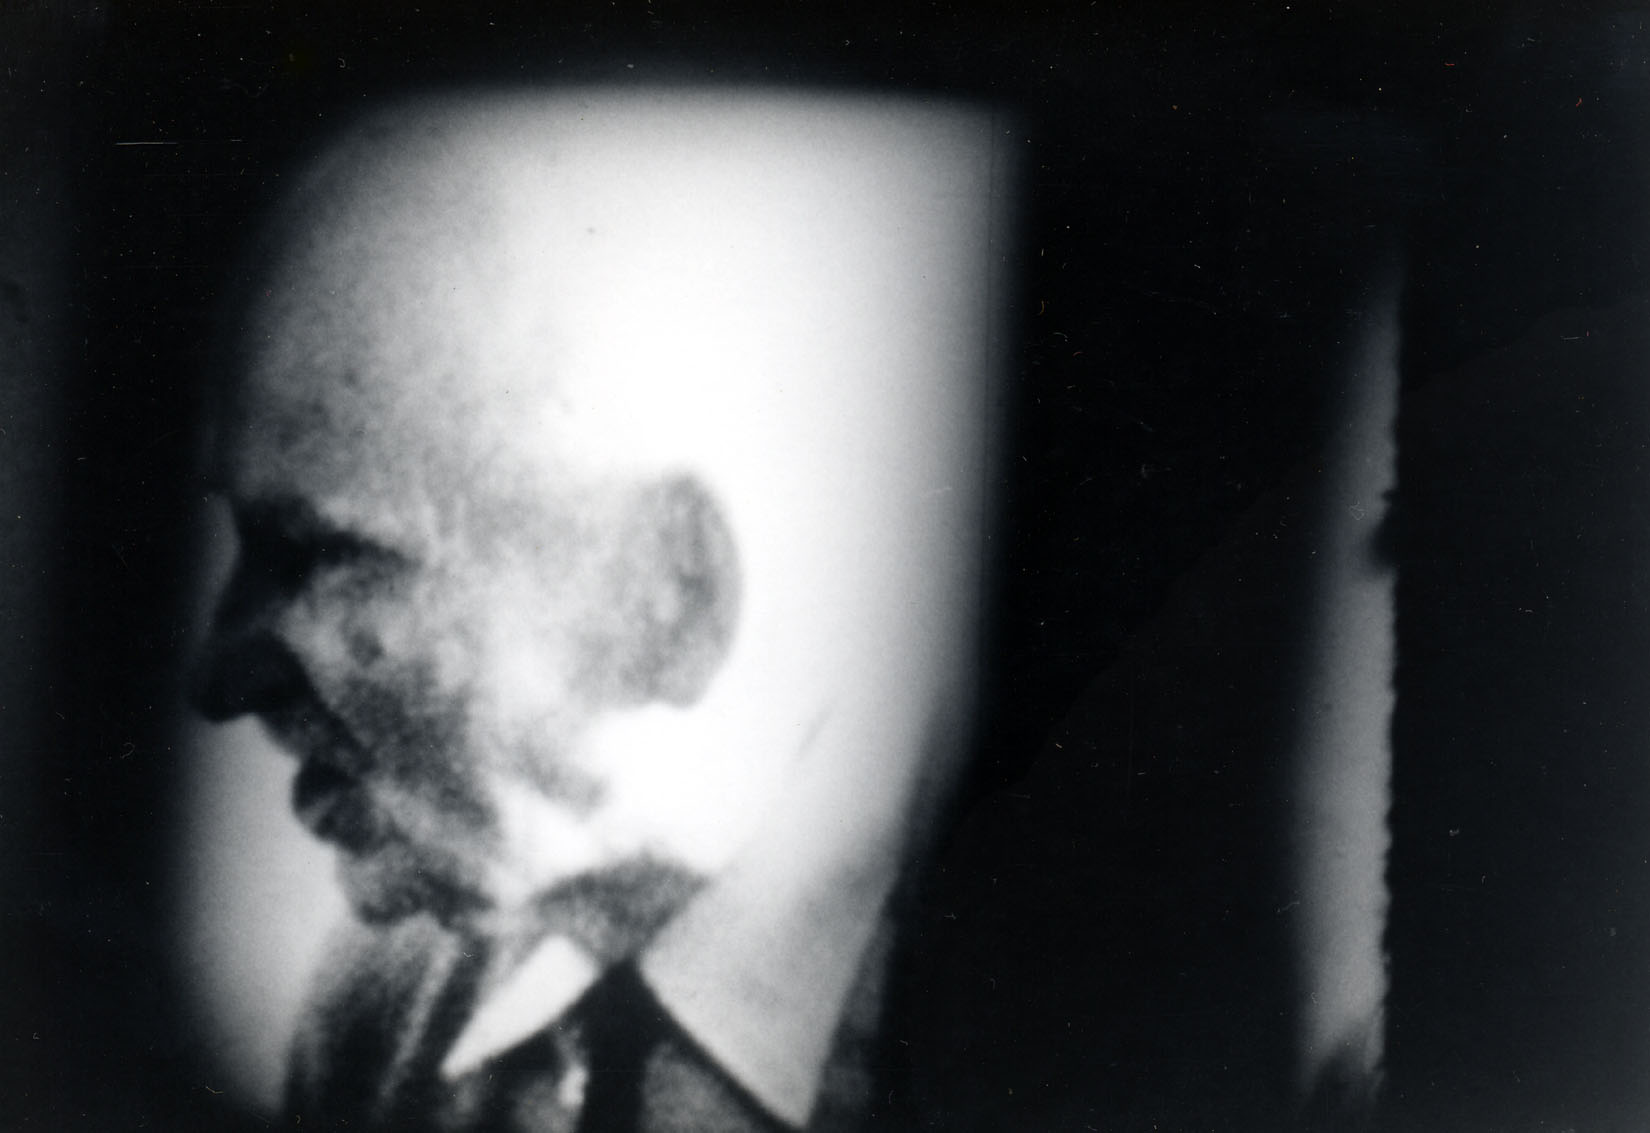 b/w photo of a profile of a man's face, shrowded by black extending from the sides of the frame